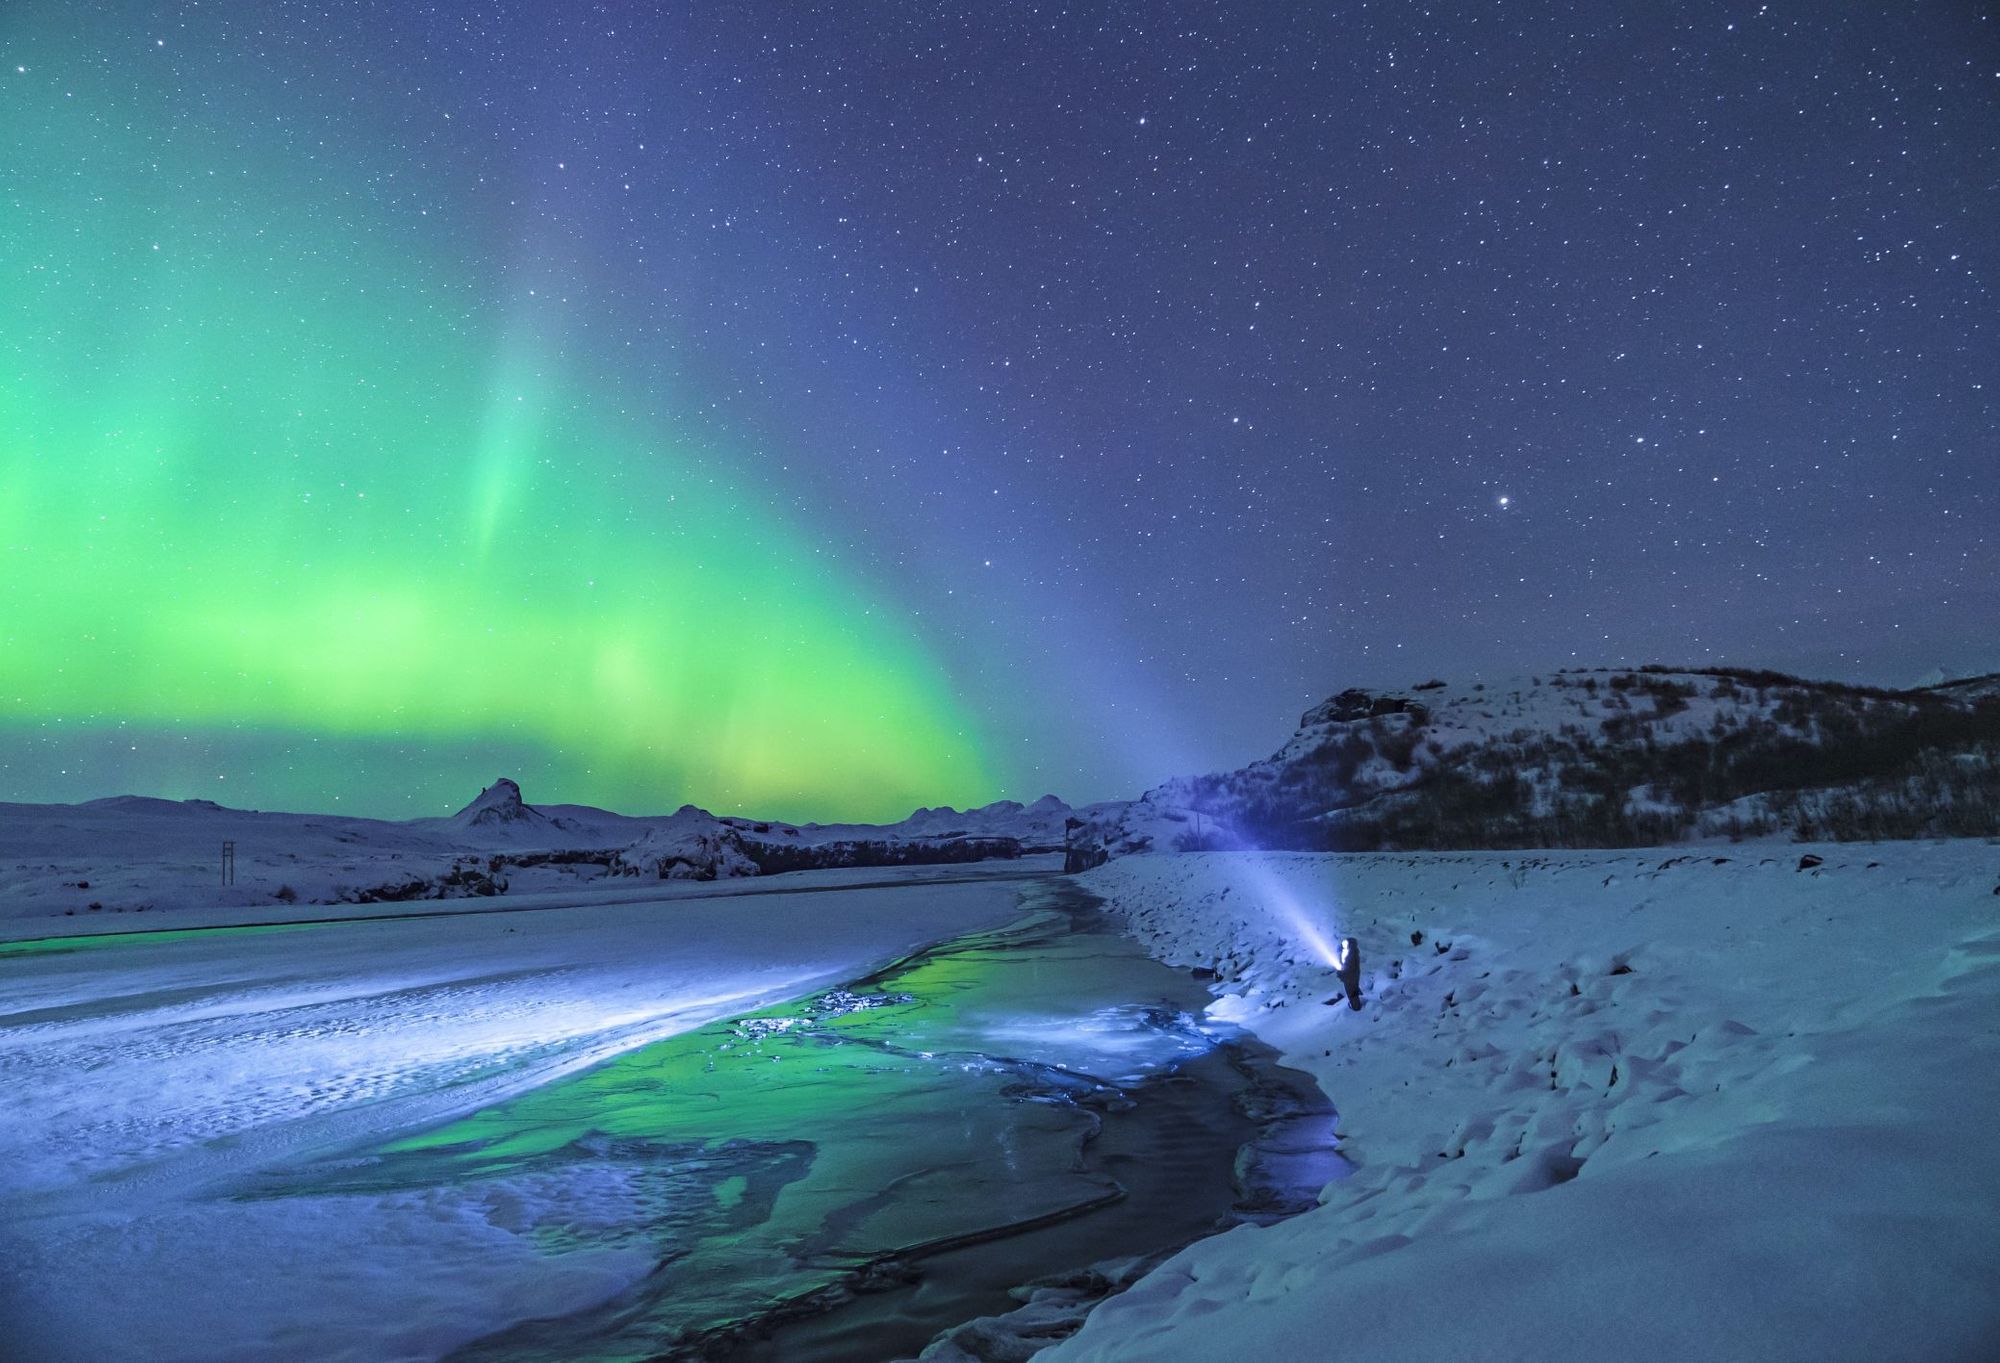 A figure stares out at a green aurora borealis in an icy landscape.